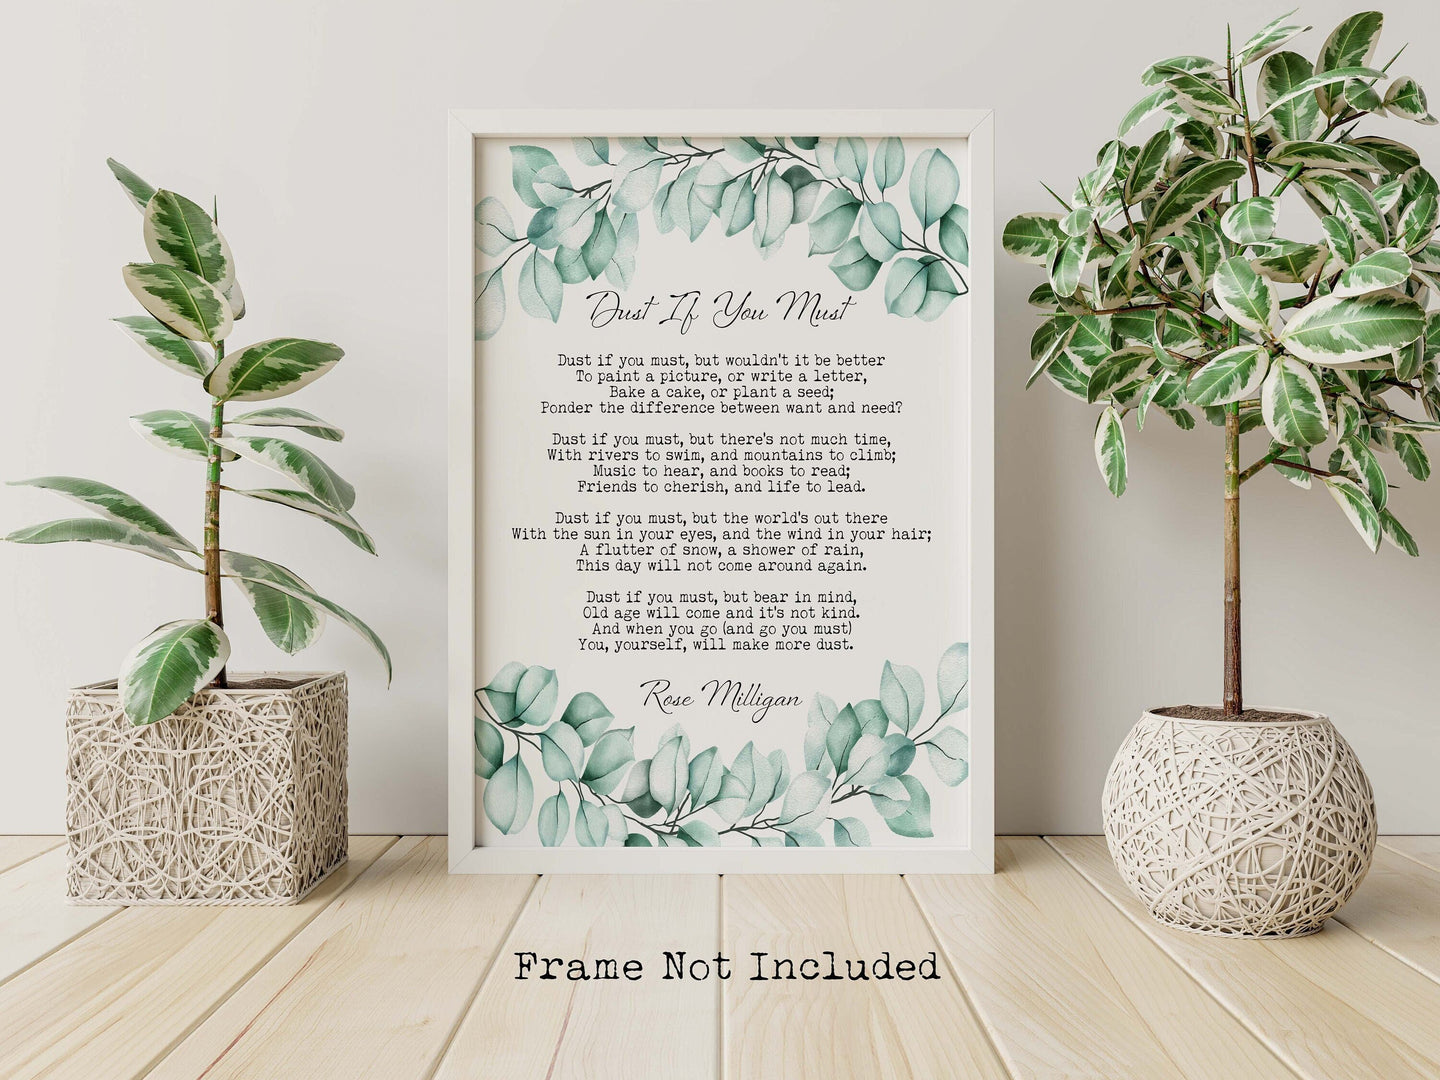 Dust If You Must Poem Print by Rose Milligan - Rose Milligan Poem Poster Print - Eucalyptus Wall Art